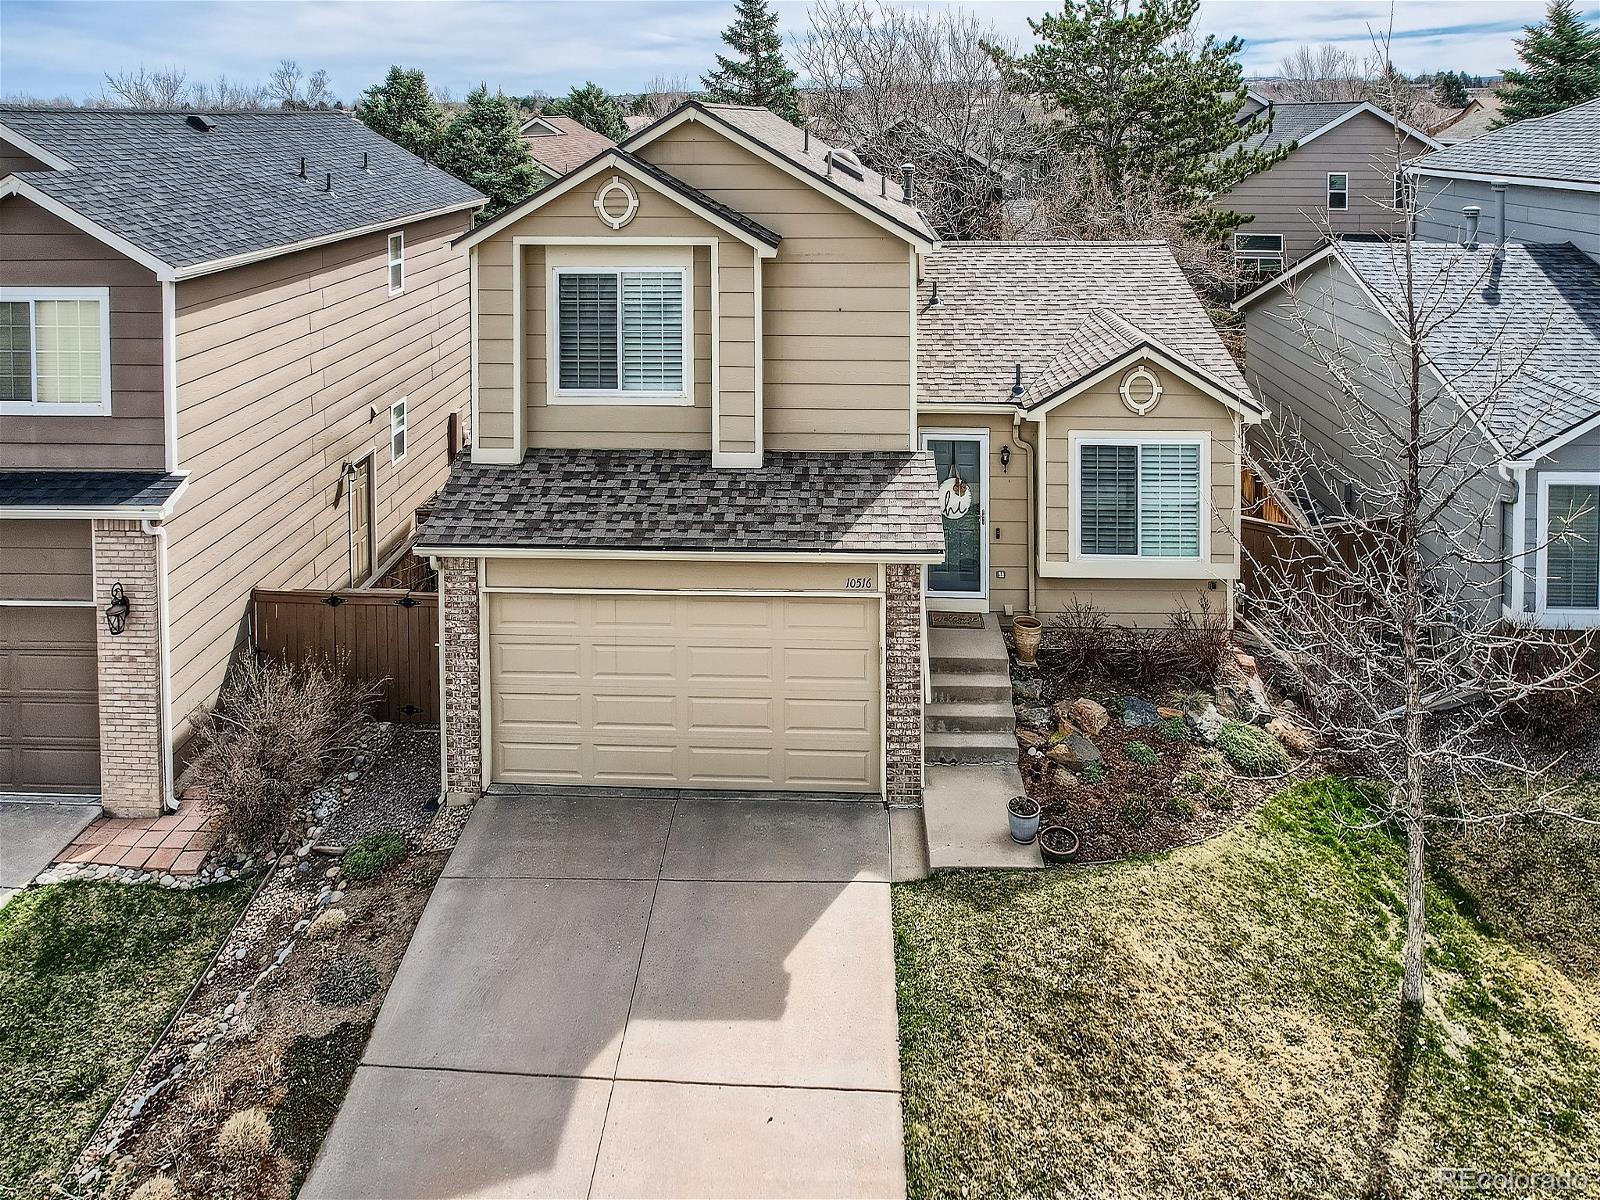 Report Image for 10516  Hyacinth Lane,Highlands Ranch, Colorado